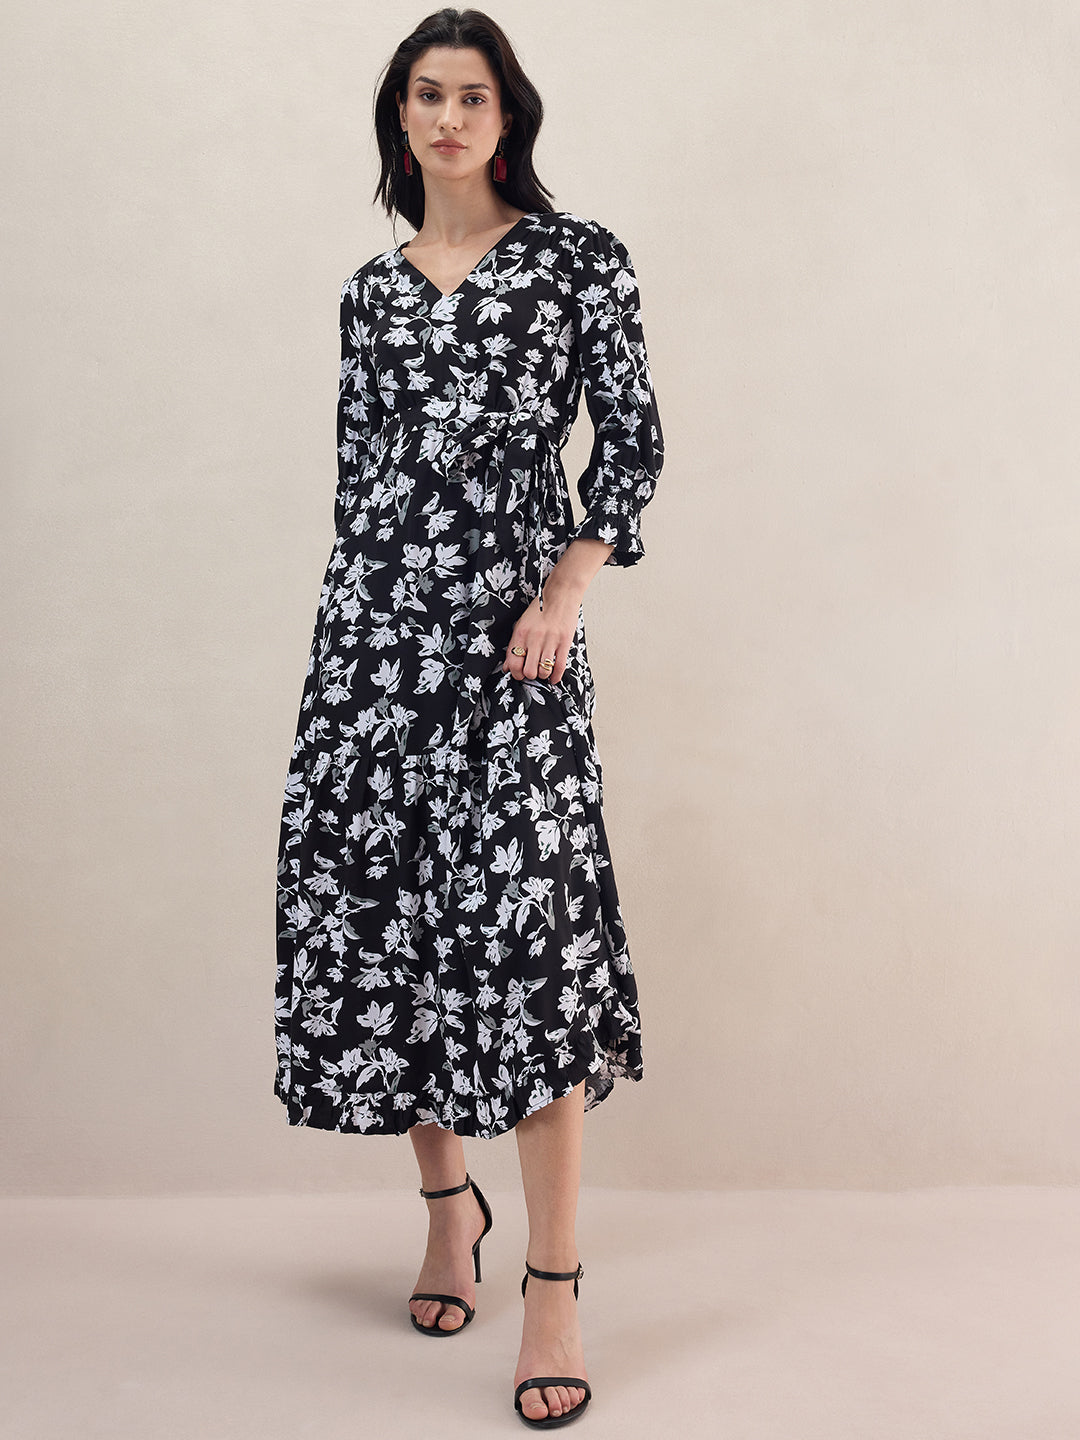 Black Floral Printed Tiered Maxi Dress